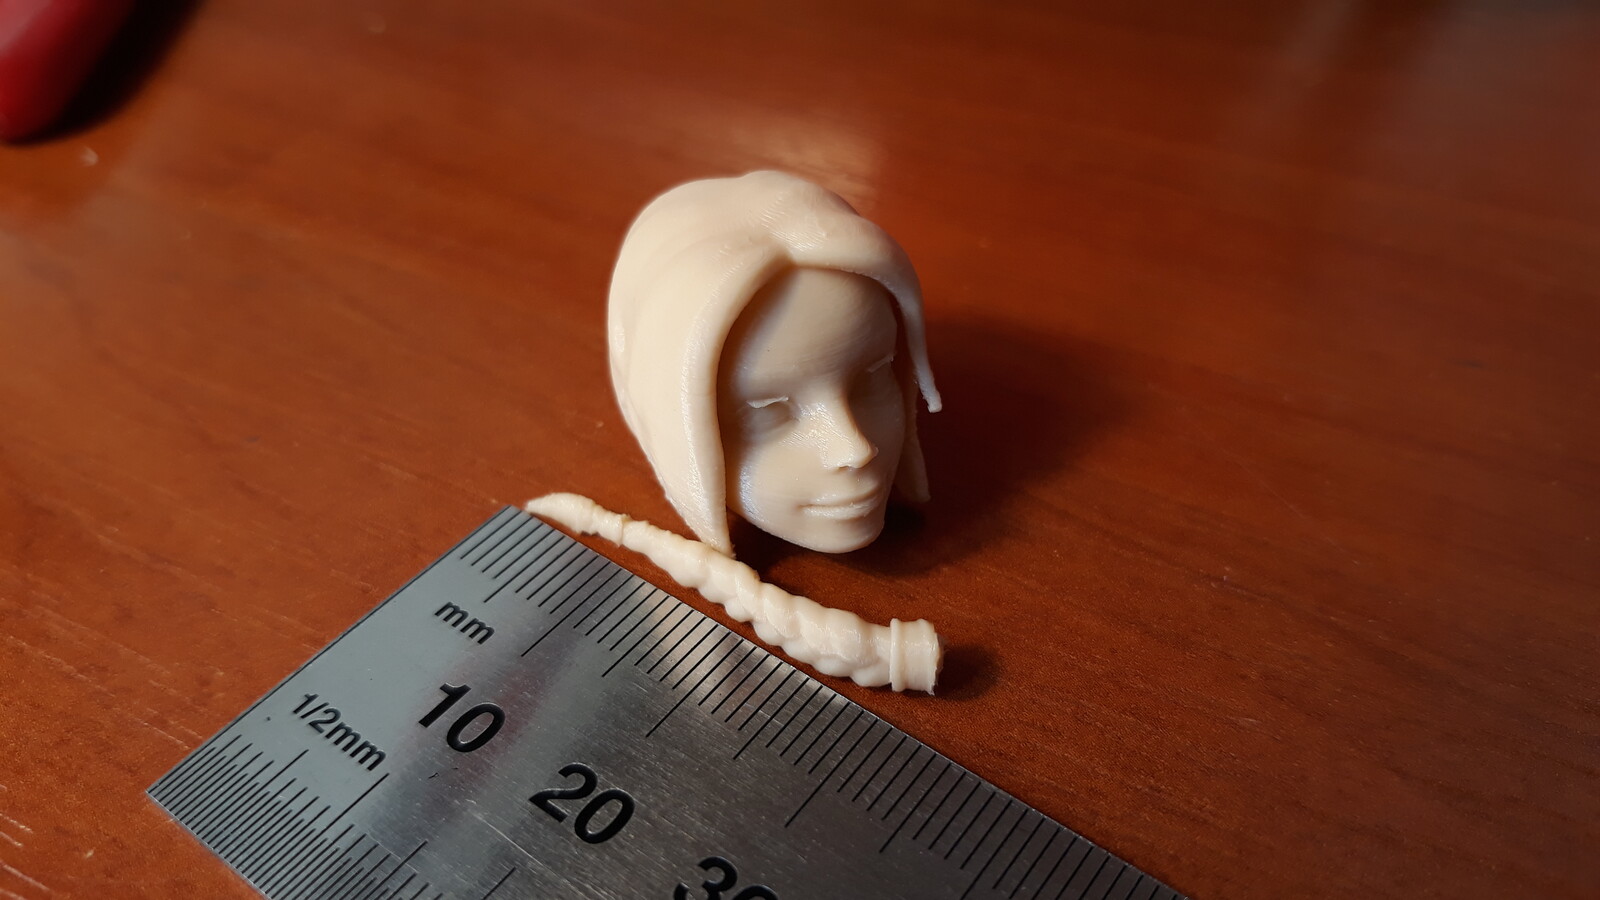 3D Printed small figurine test.
Yes, it will be available for 3D Printing too ;)